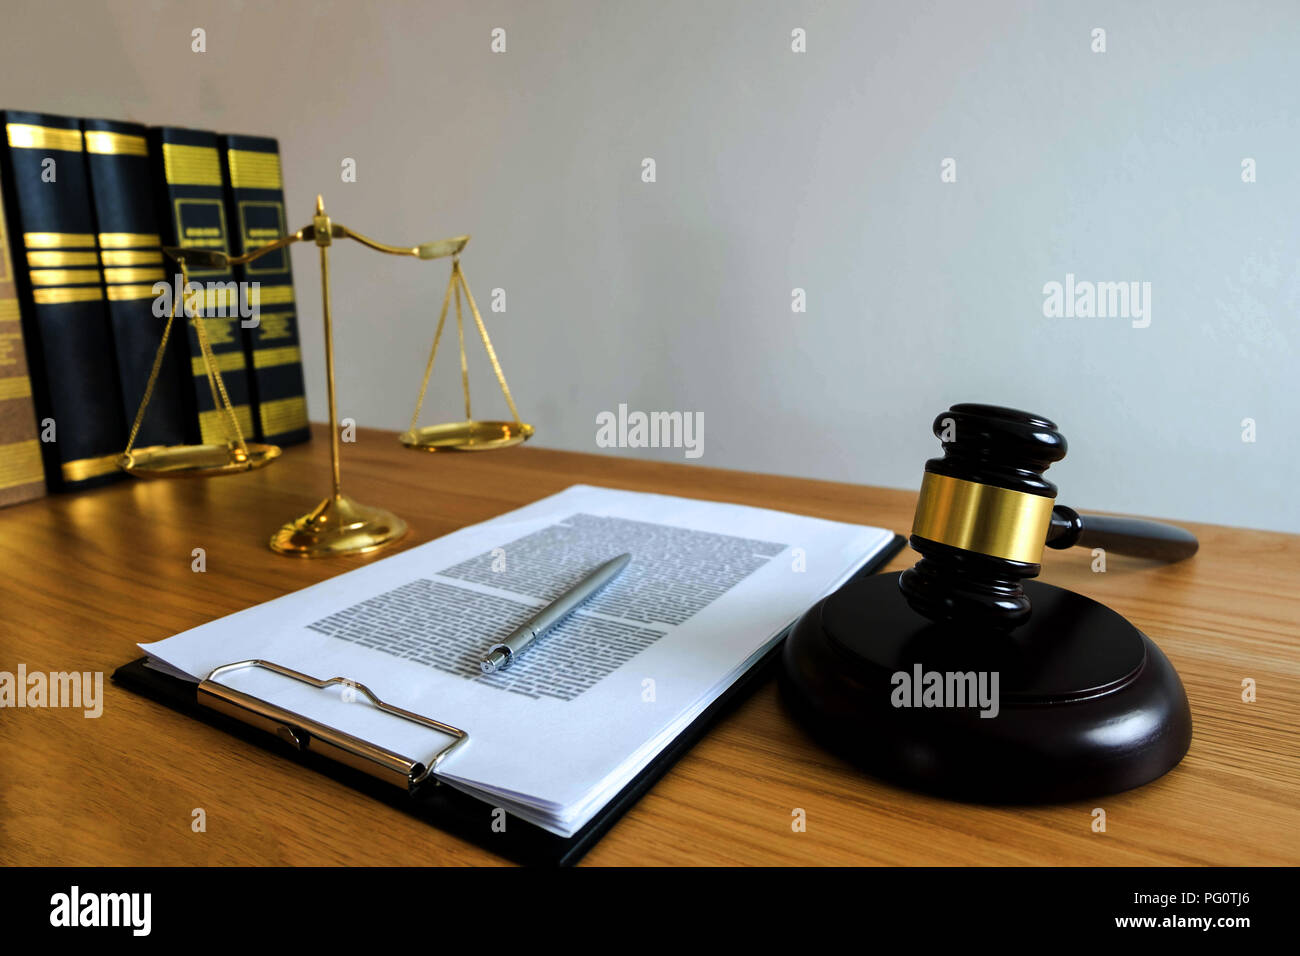 Close up object  law concept. Judge gavel with justice lawyers and documents working on table. Stock Photo